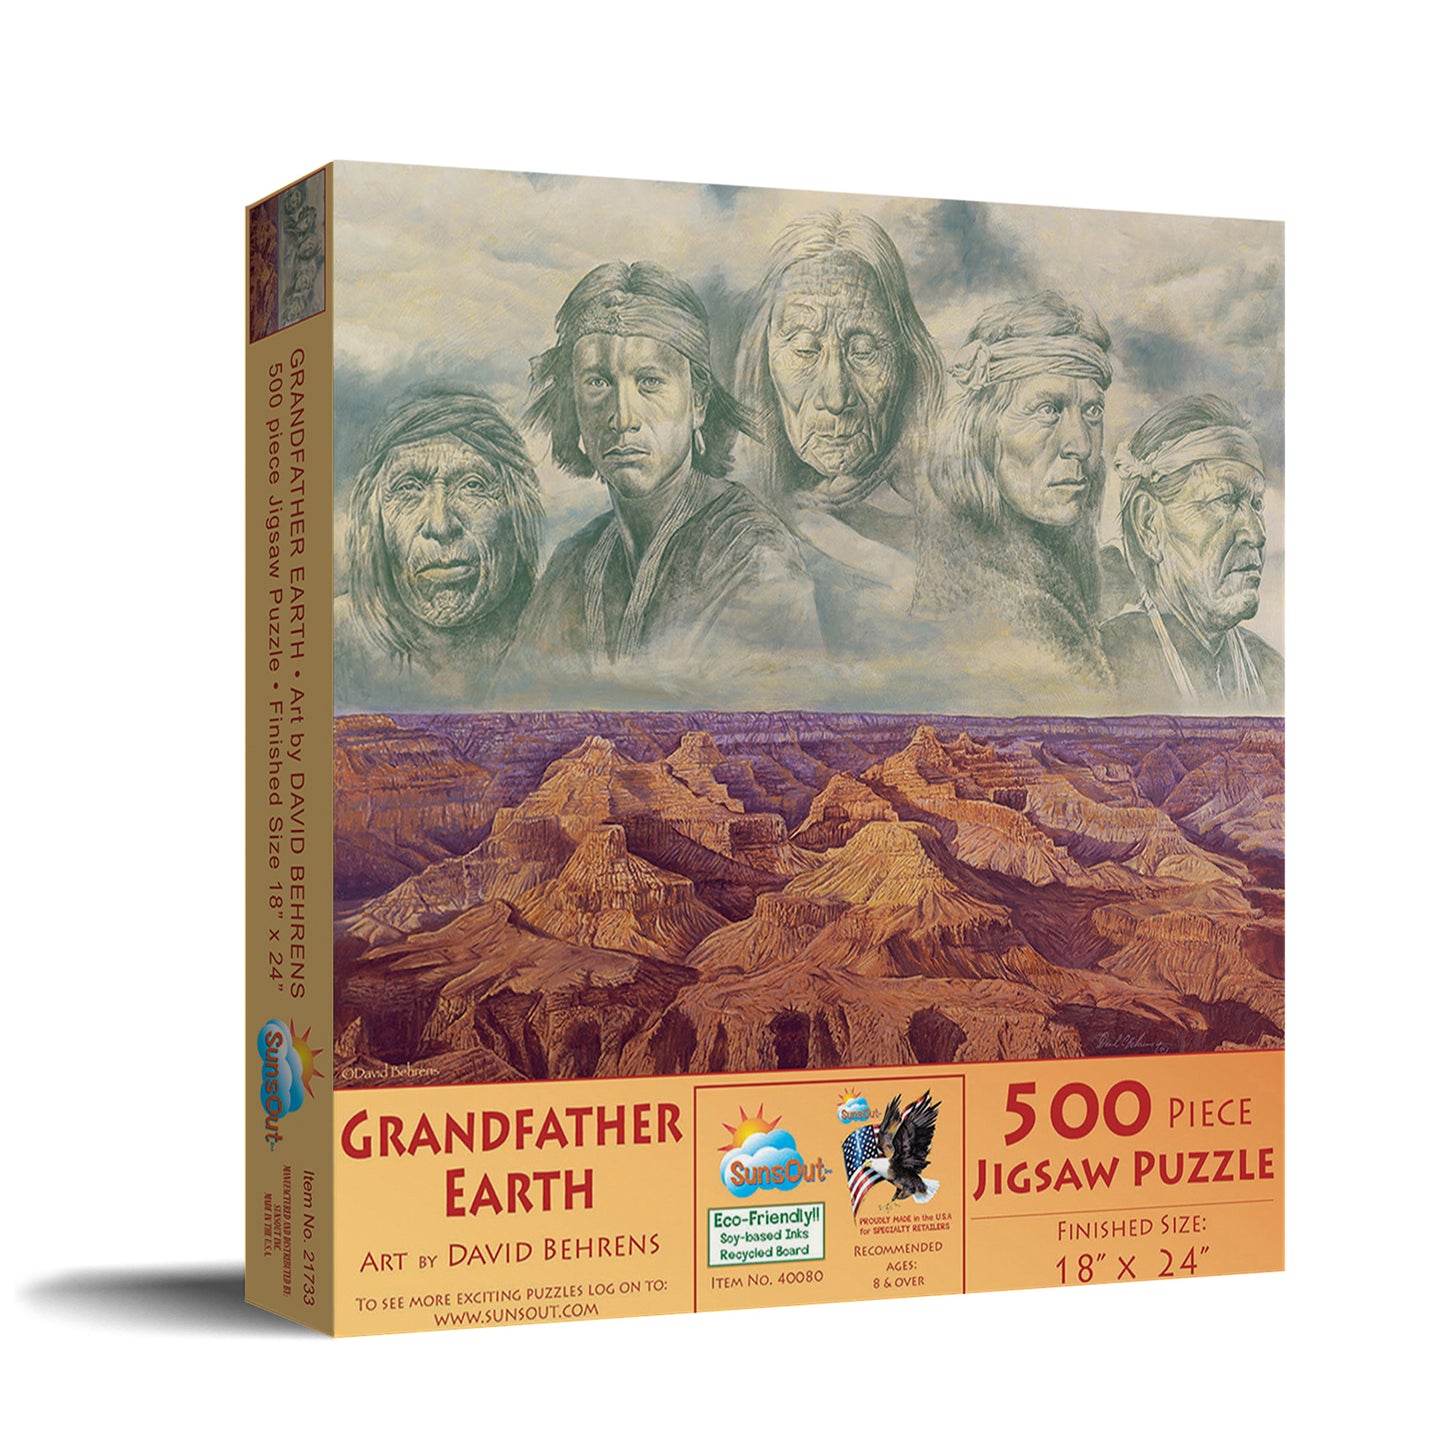 Grandfather Earth - 500 Piece Jigsaw Puzzle